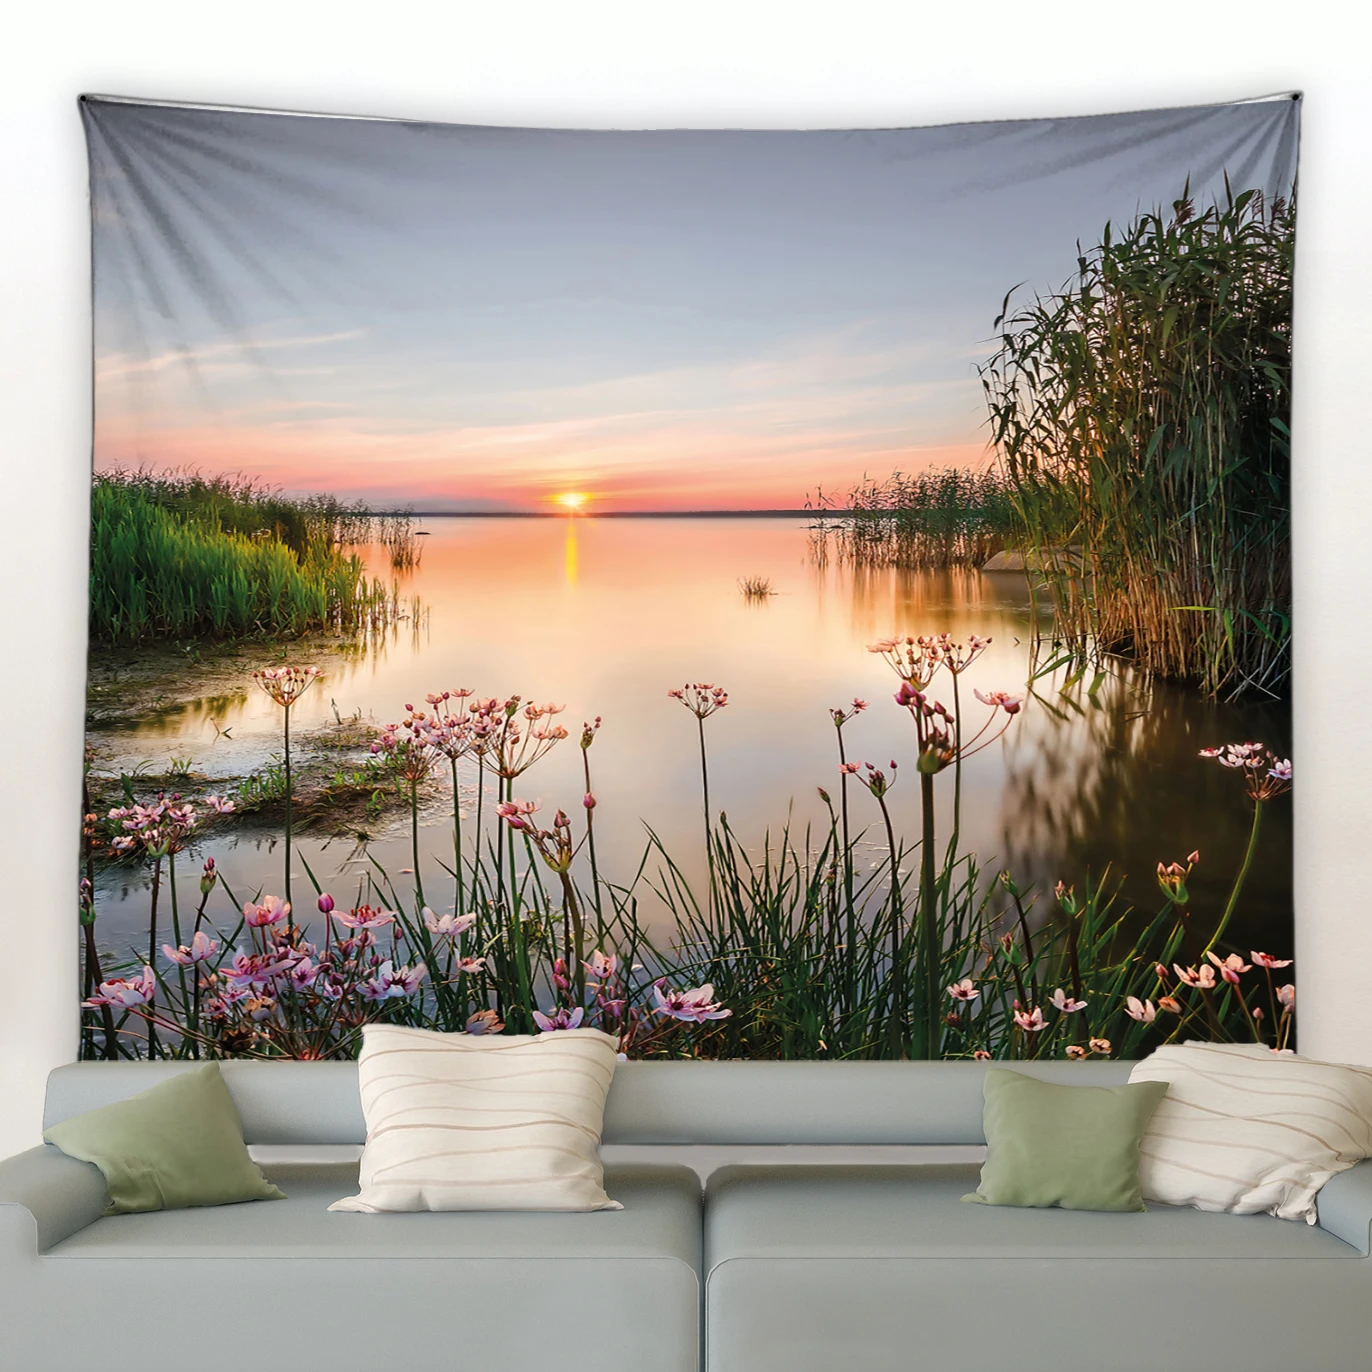 

Country Landscape Tapestry Sunset Dusk Ocean Palm Leaf Forest Waterfall Flower Plant Scenery Garden Wall Hanging Room Home Decor